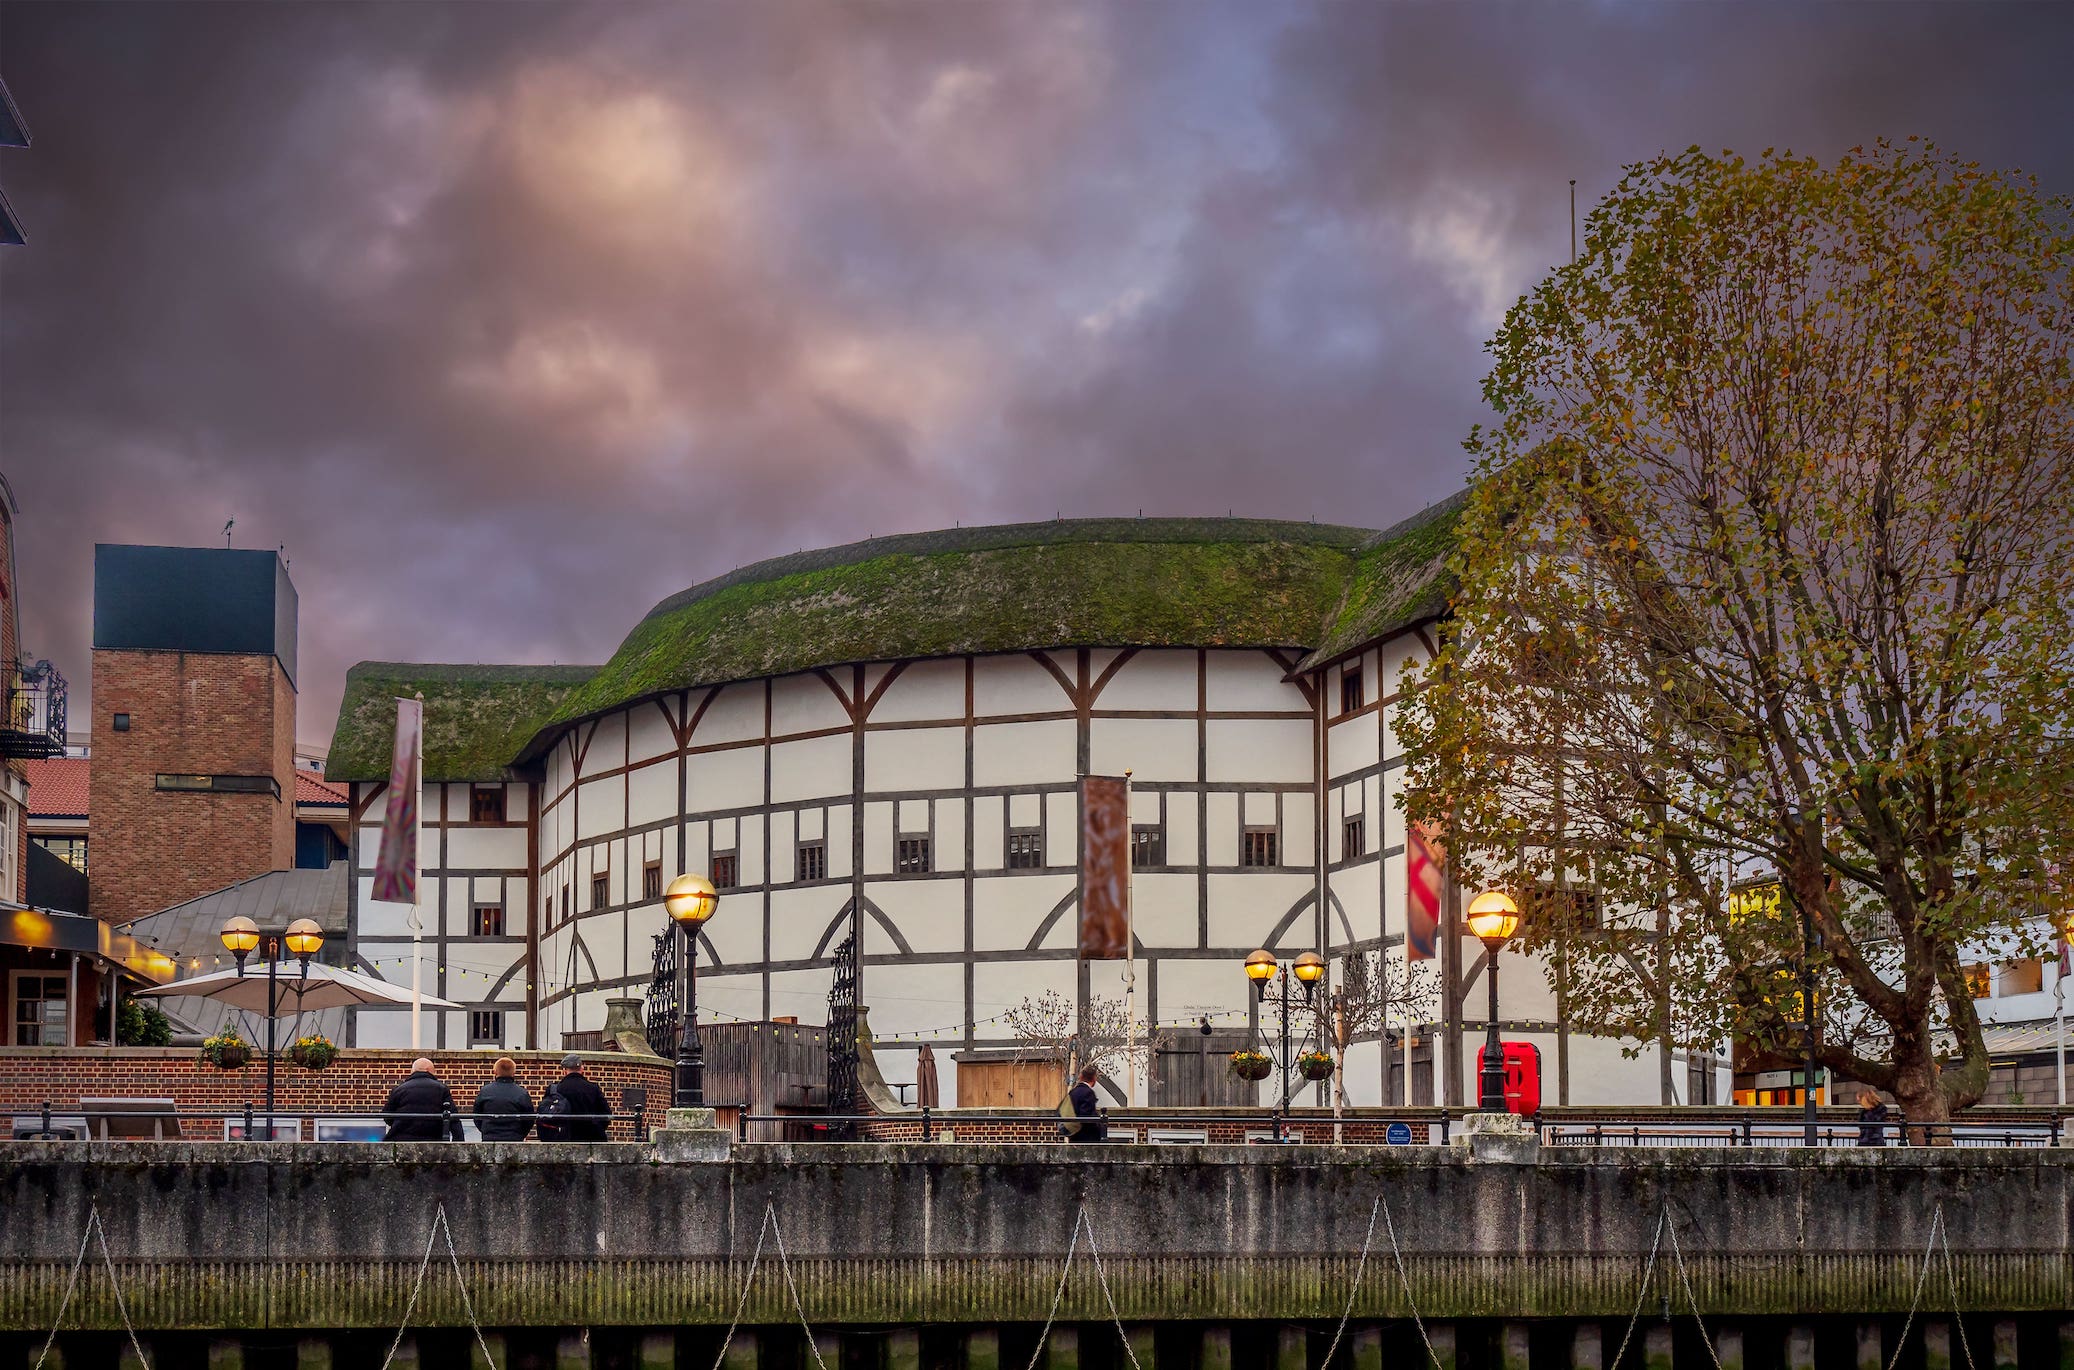 1613 Shakespeare’s Globe Theatre in London, England, burns down during a performance of “Henry VIII”